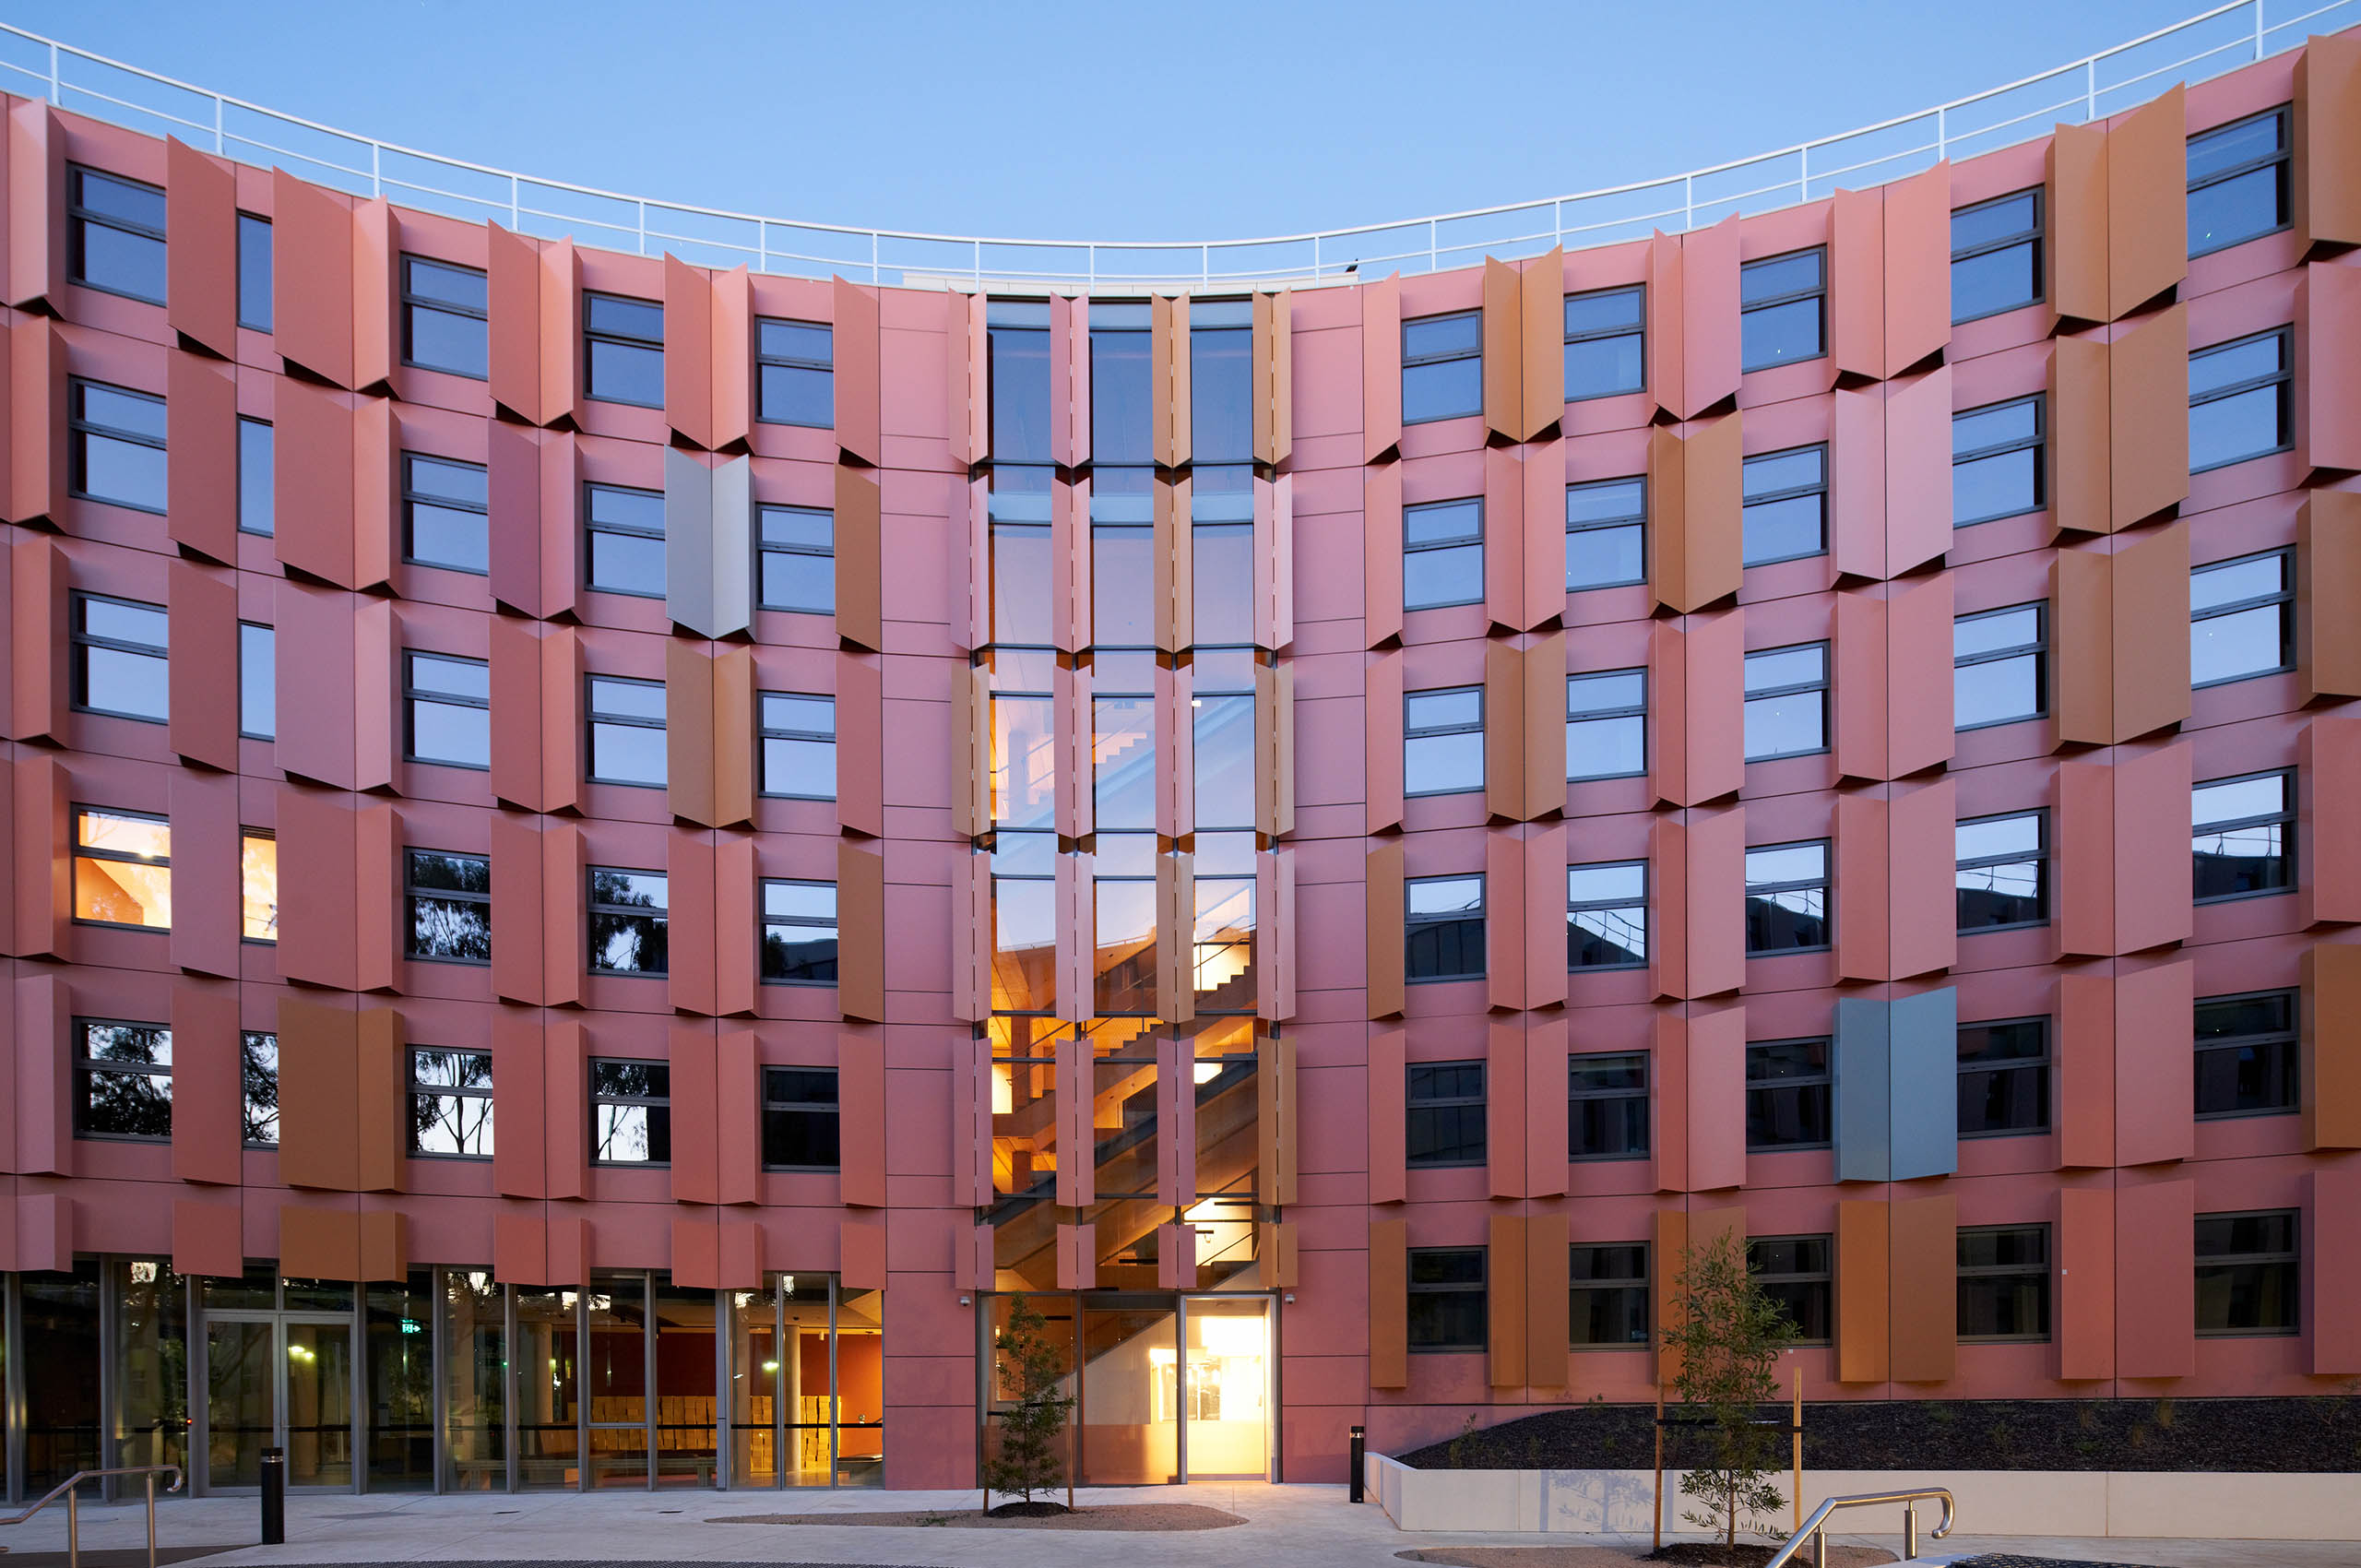 The buildings are constructed with Cross Laminated Timber (CLT) – a sustainable and renewable construction technology.